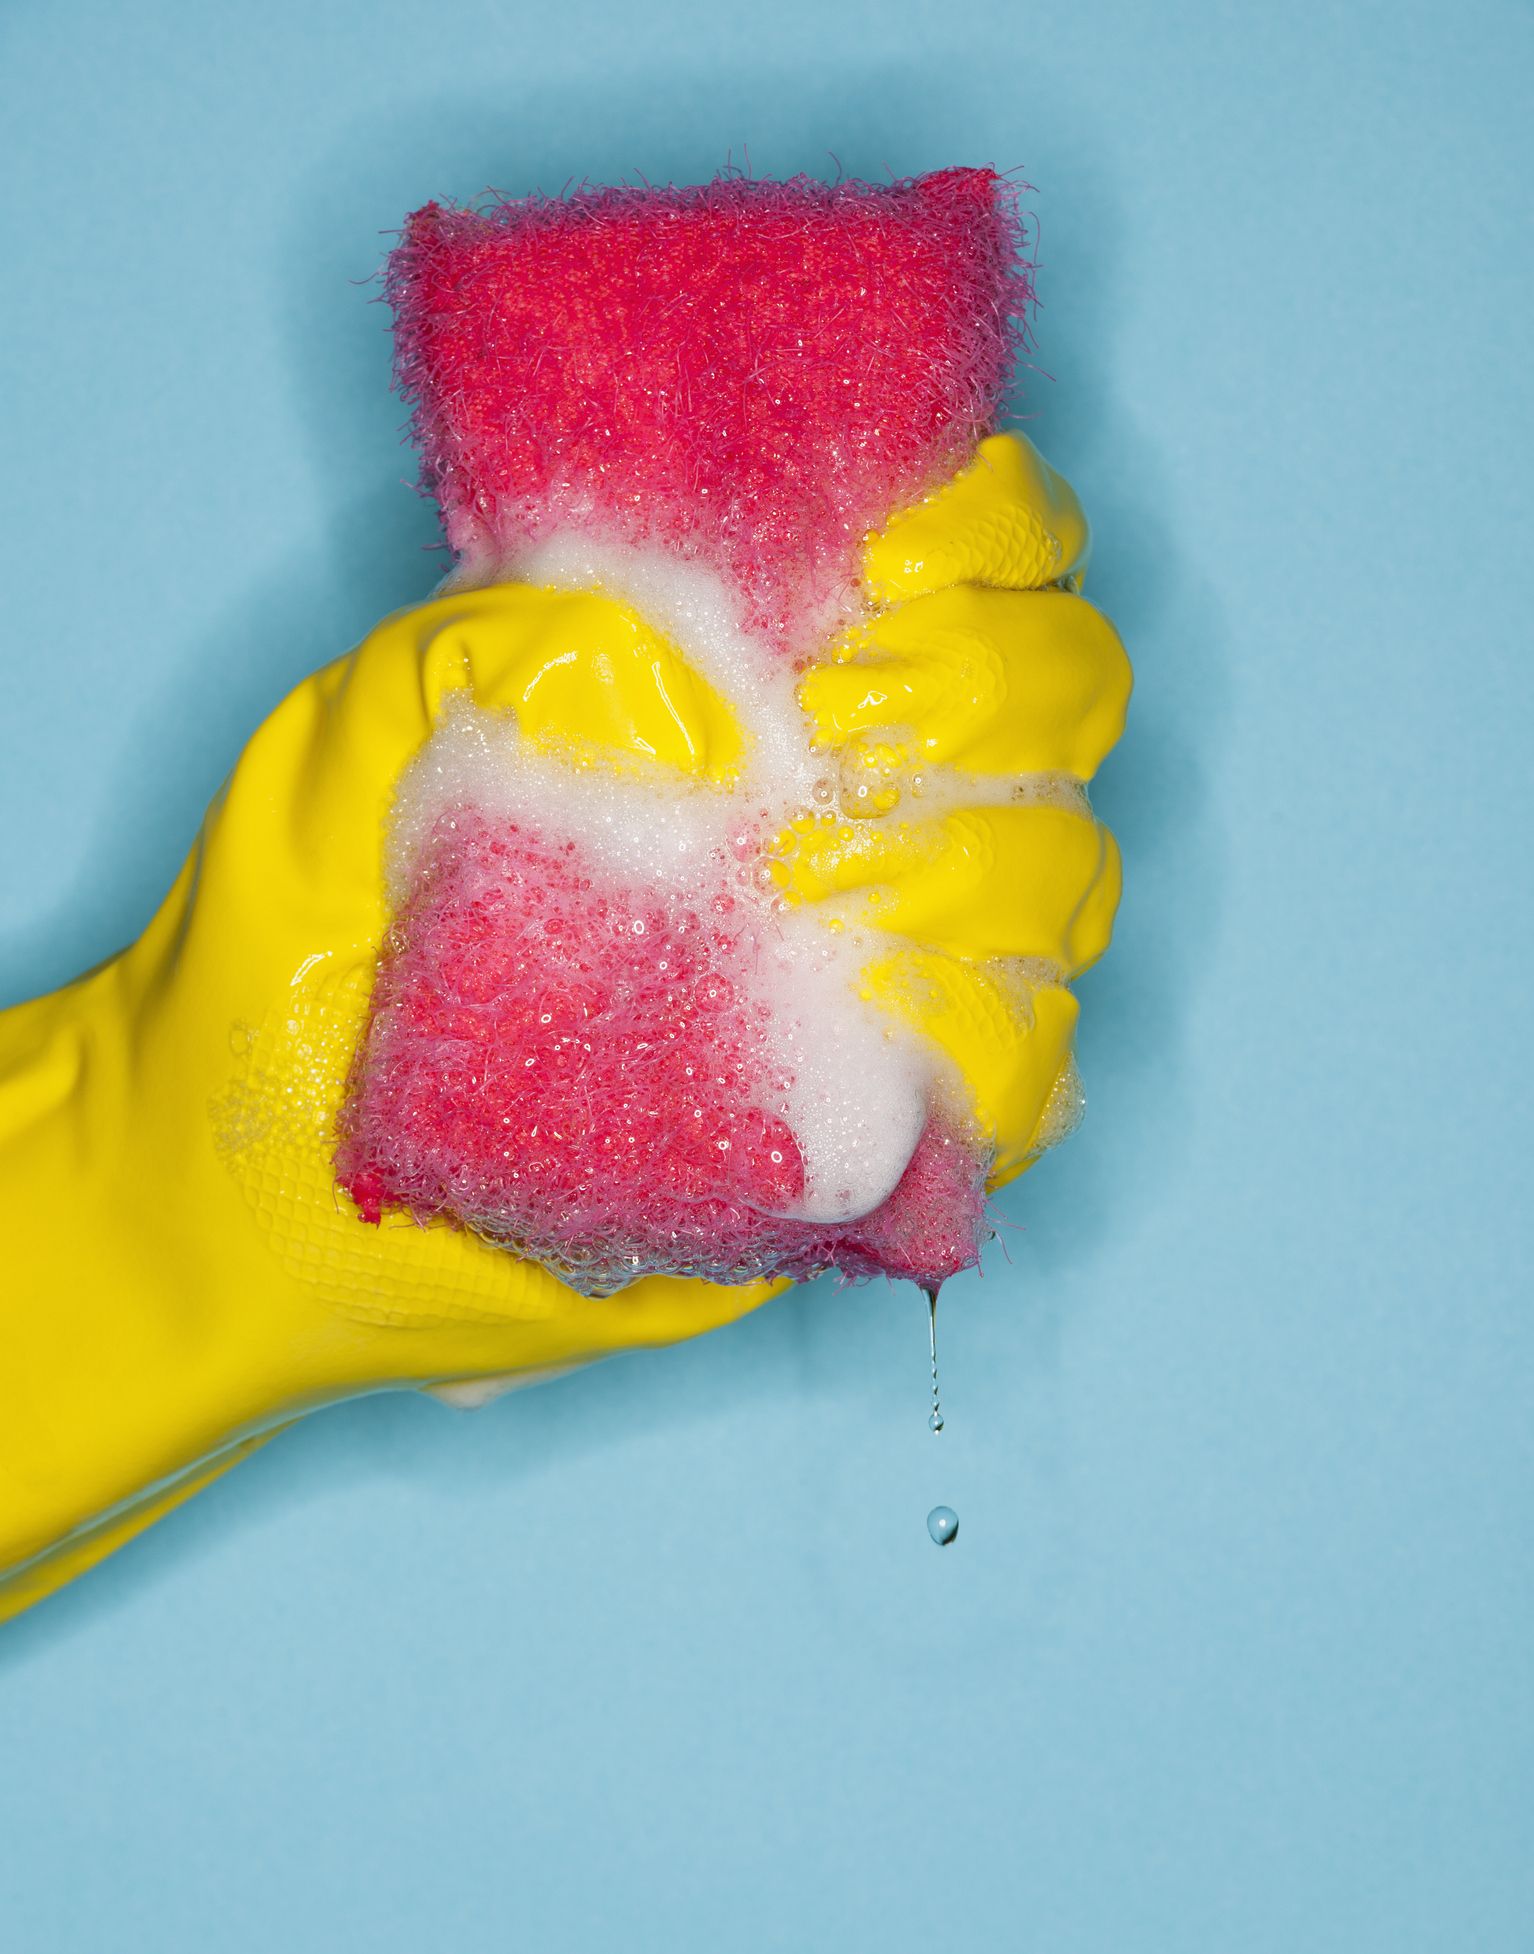 How Dirty Is Your Kitchen Sponge?